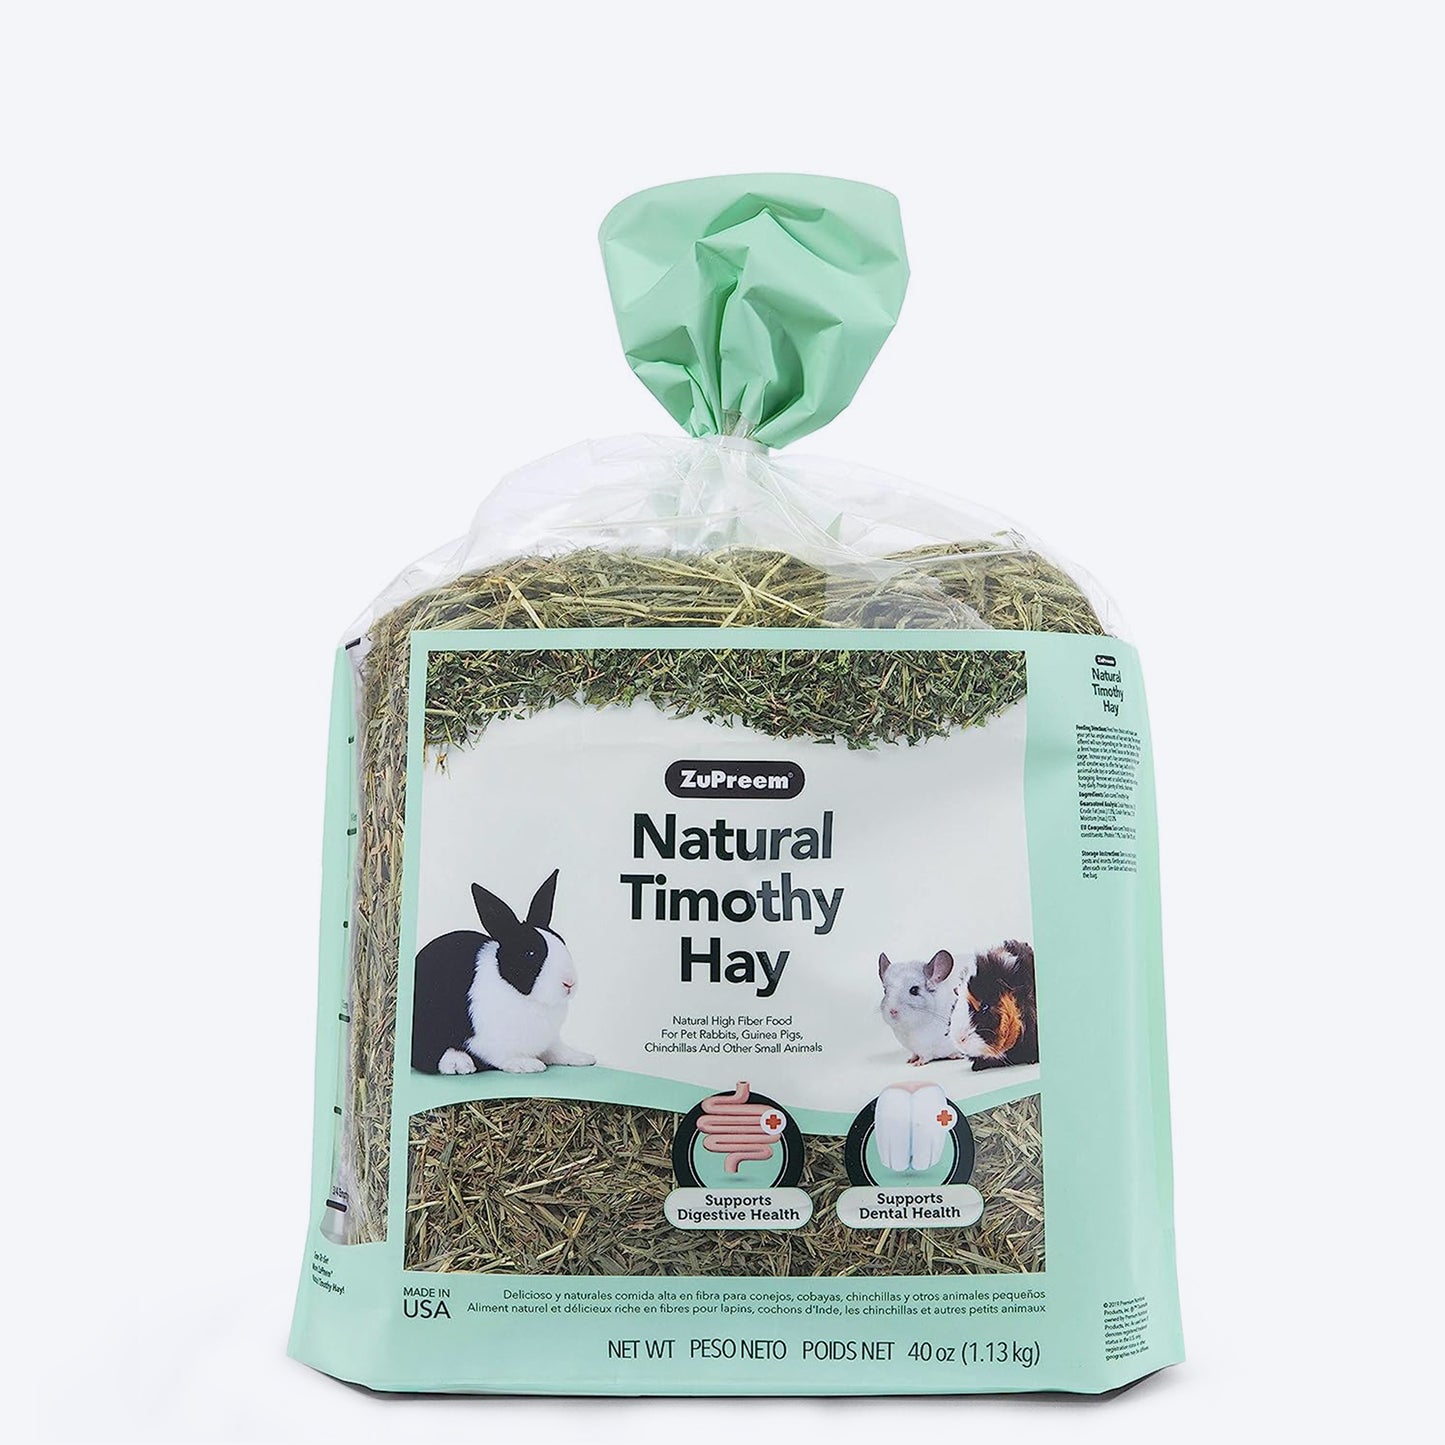 Zupreem Nature's Promise Western Timothy Dry Hay for Small Animals_06